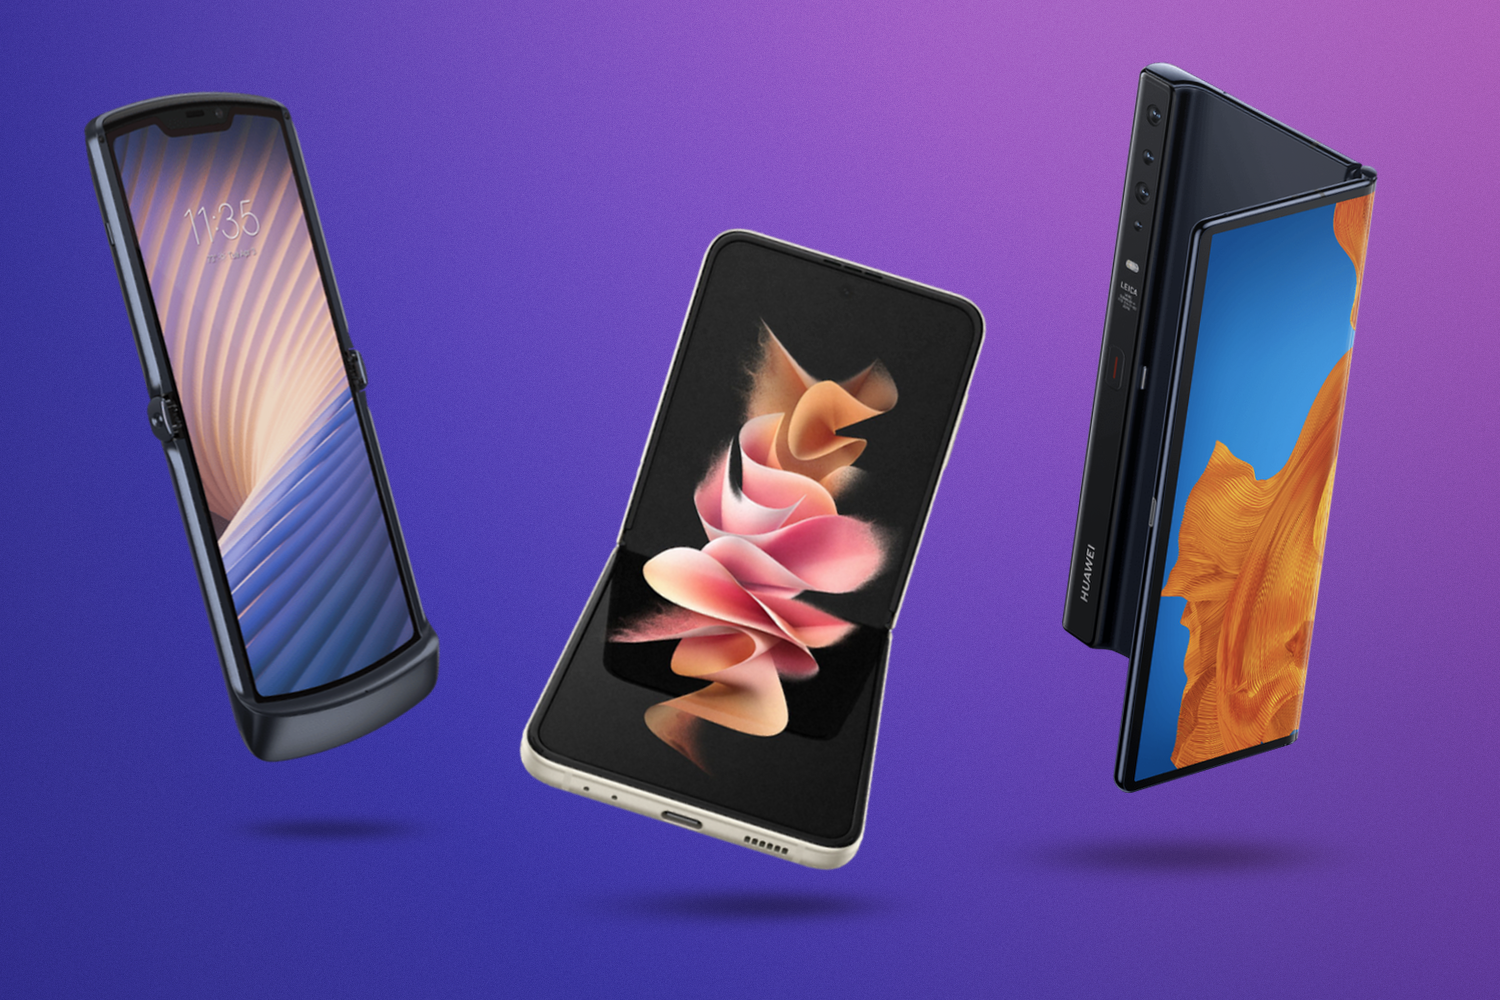 The Best Cheap Phones for 2024